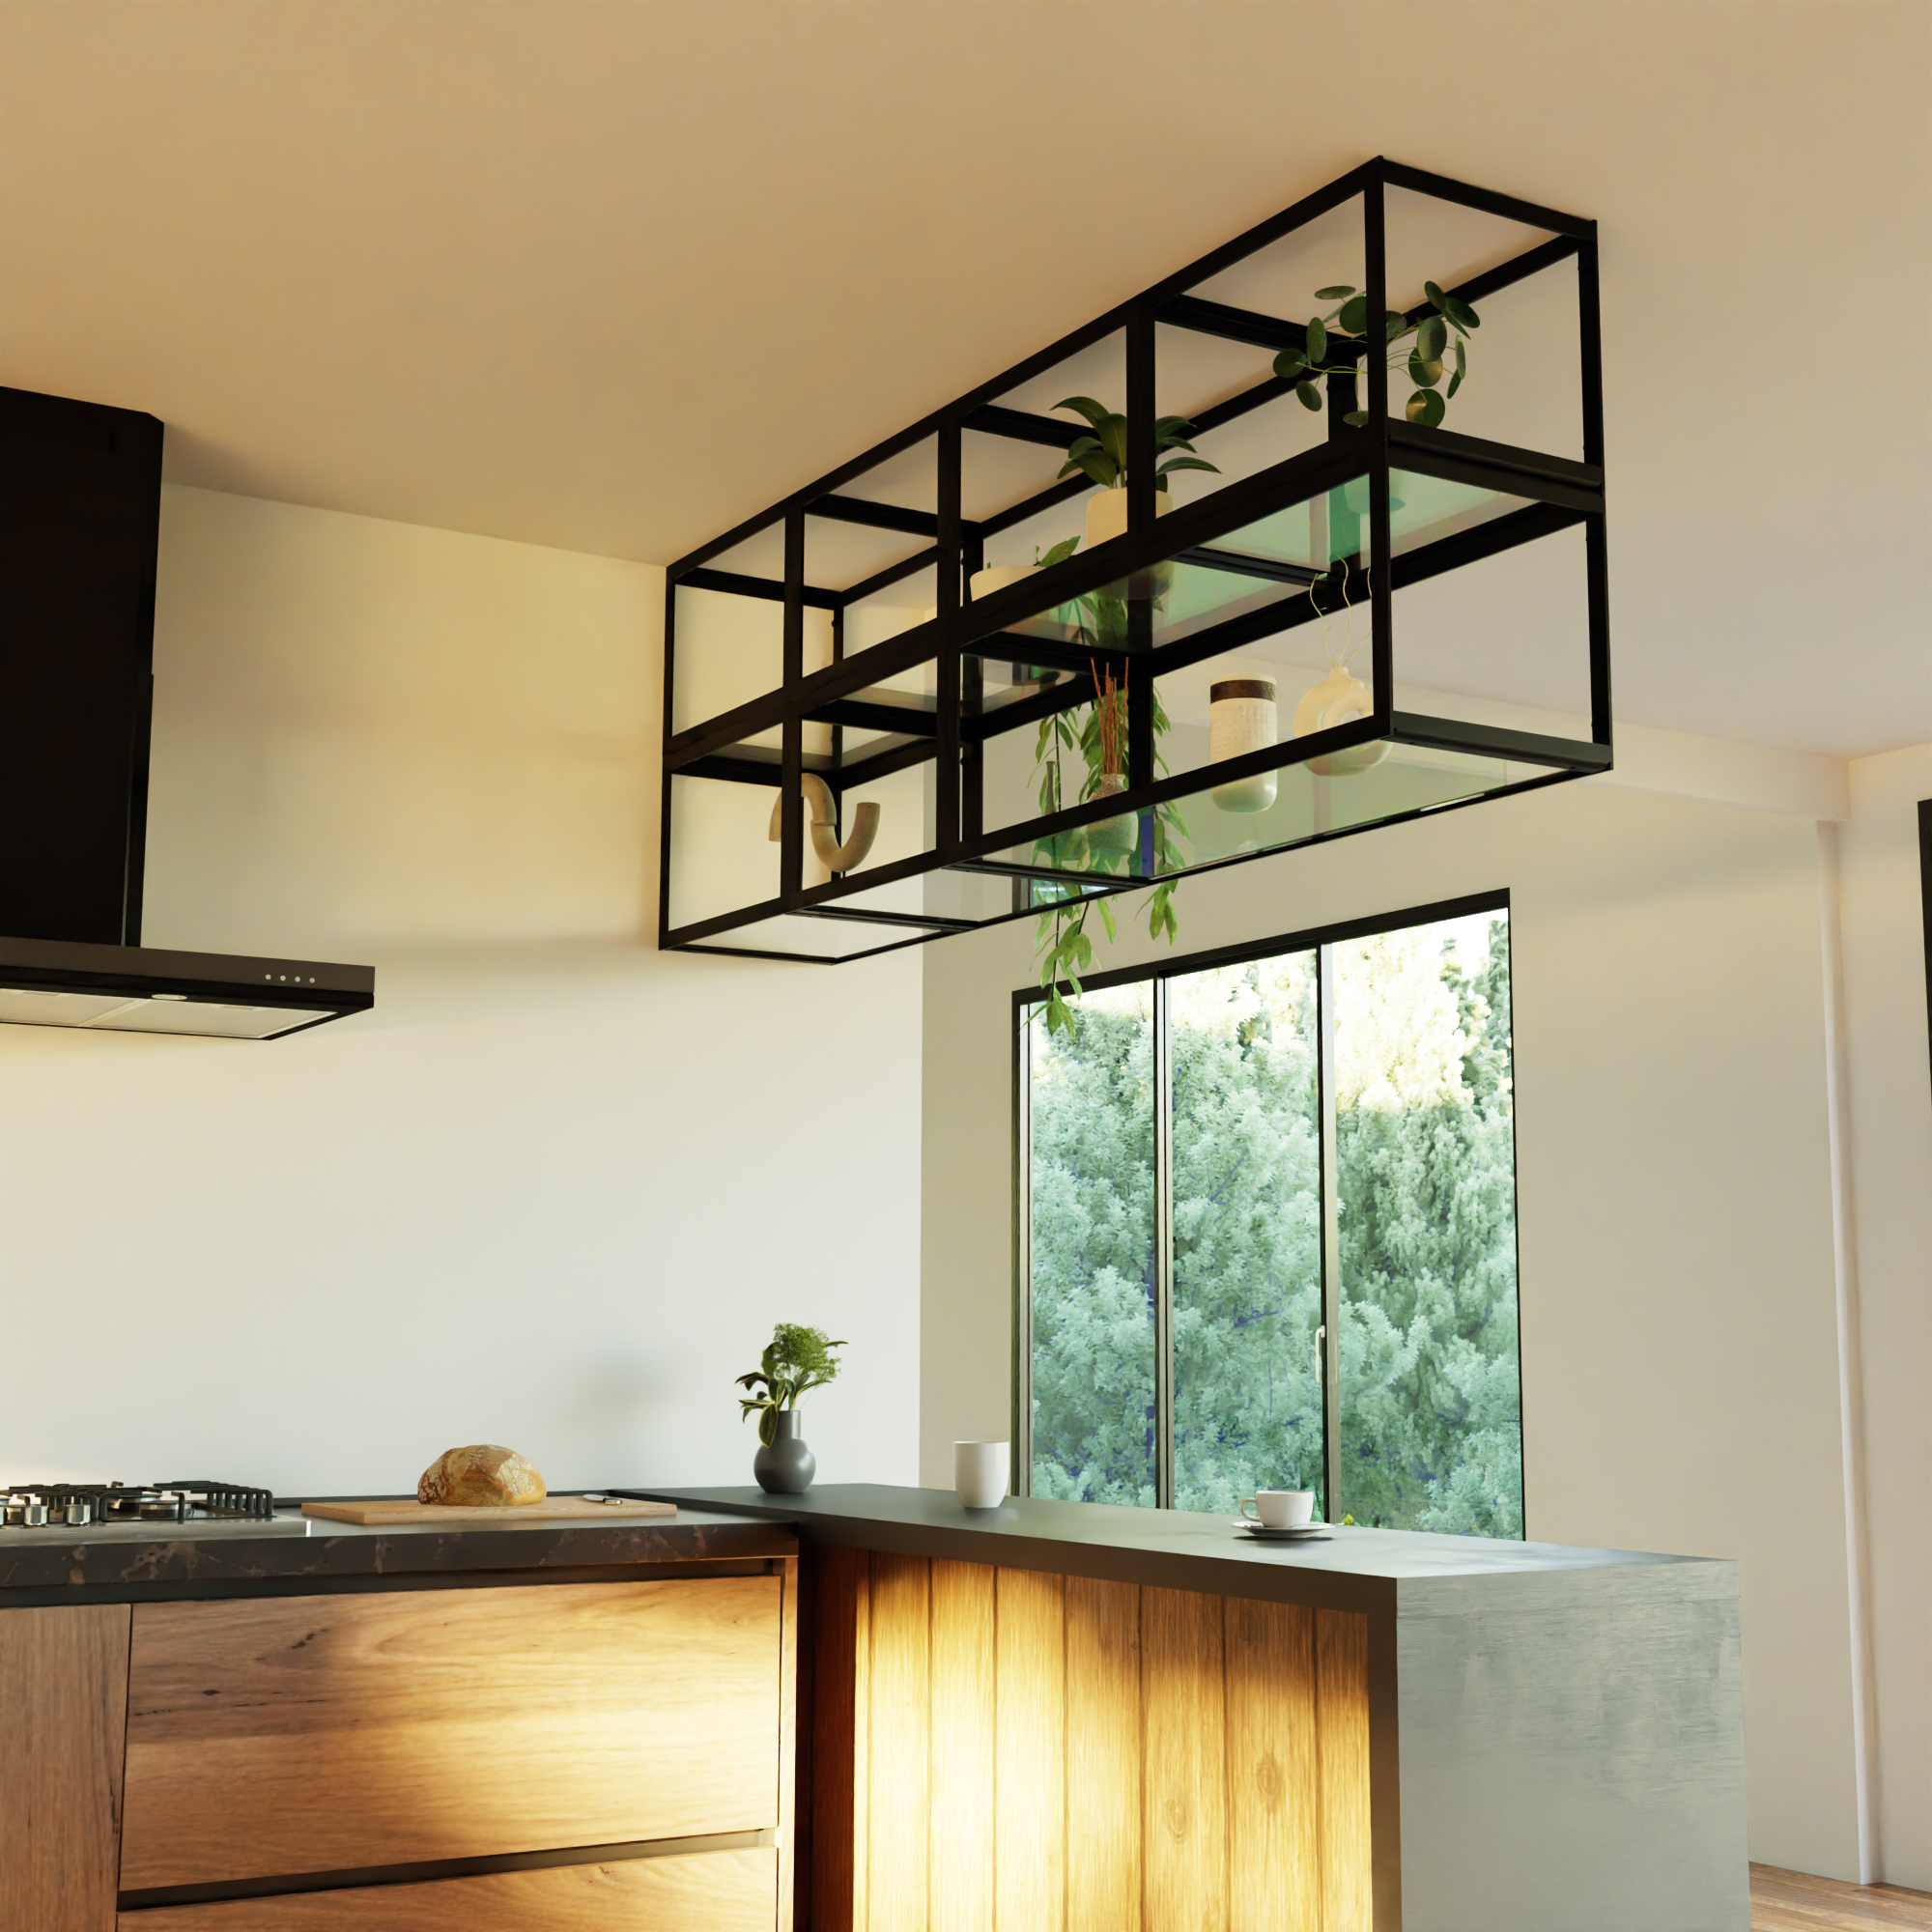 4 Alternatives to Kitchen Cabinets feat. The Cube Cabinet